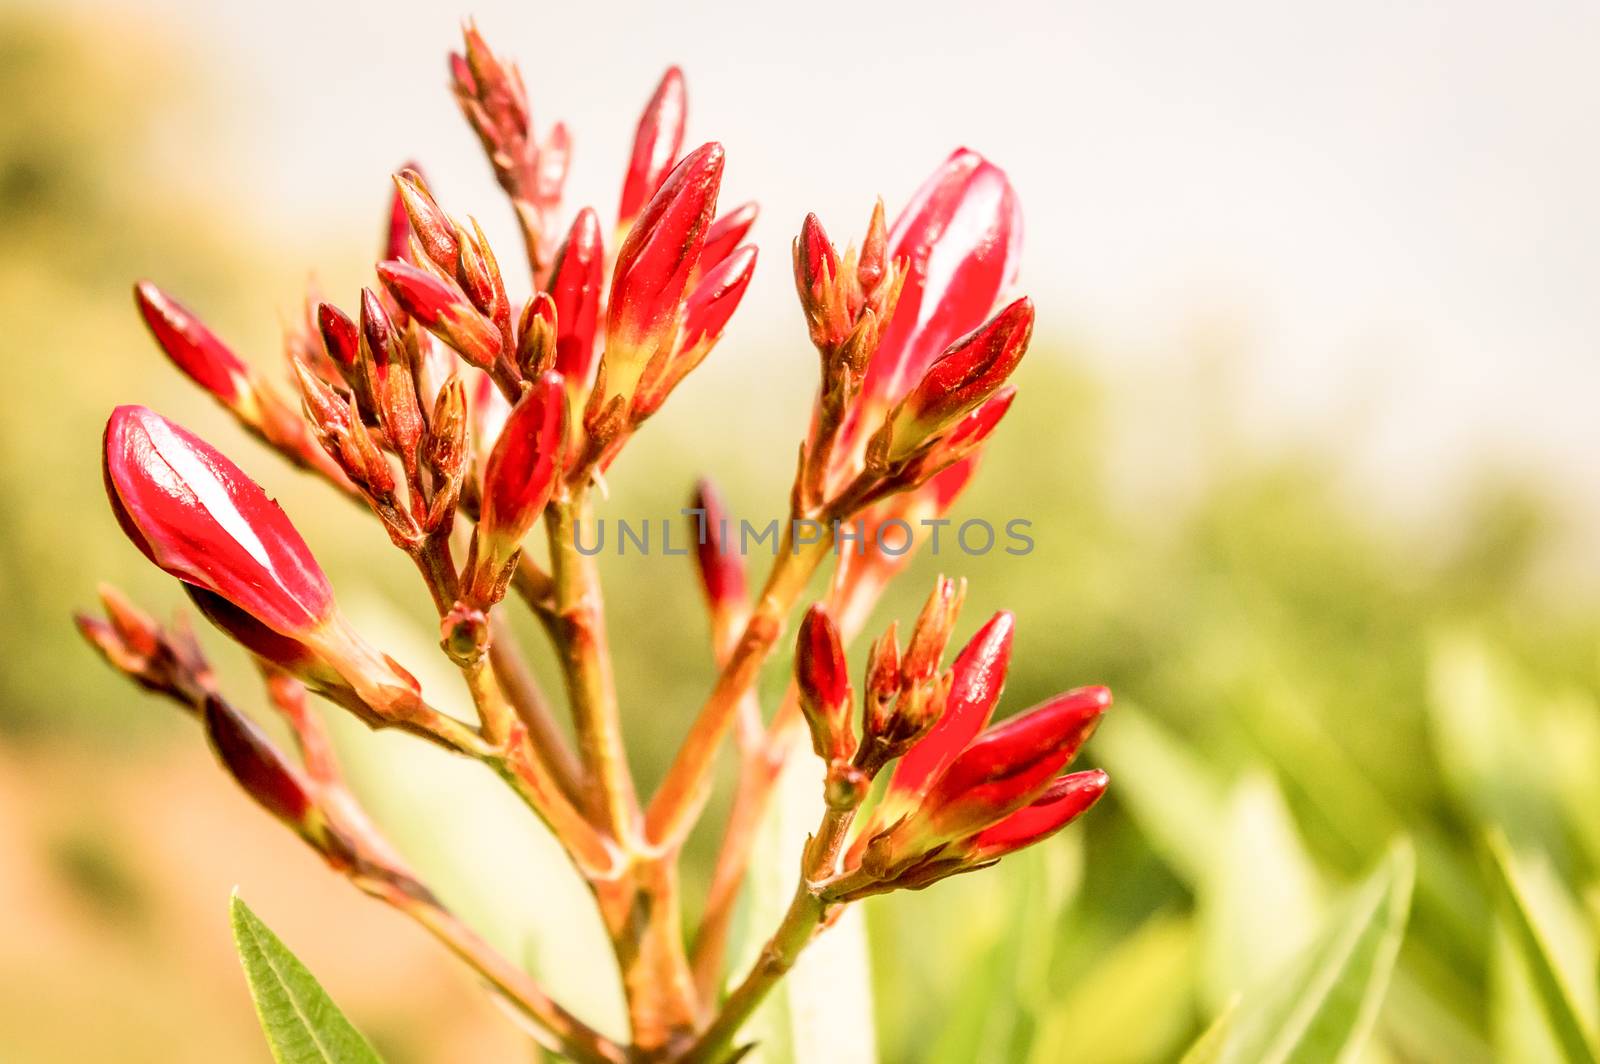 Red ginger (Alpinia purpurata) also called ostrich plume and pink cone ginger, native Malaysian plants with showy flowers on long colored red bracts.